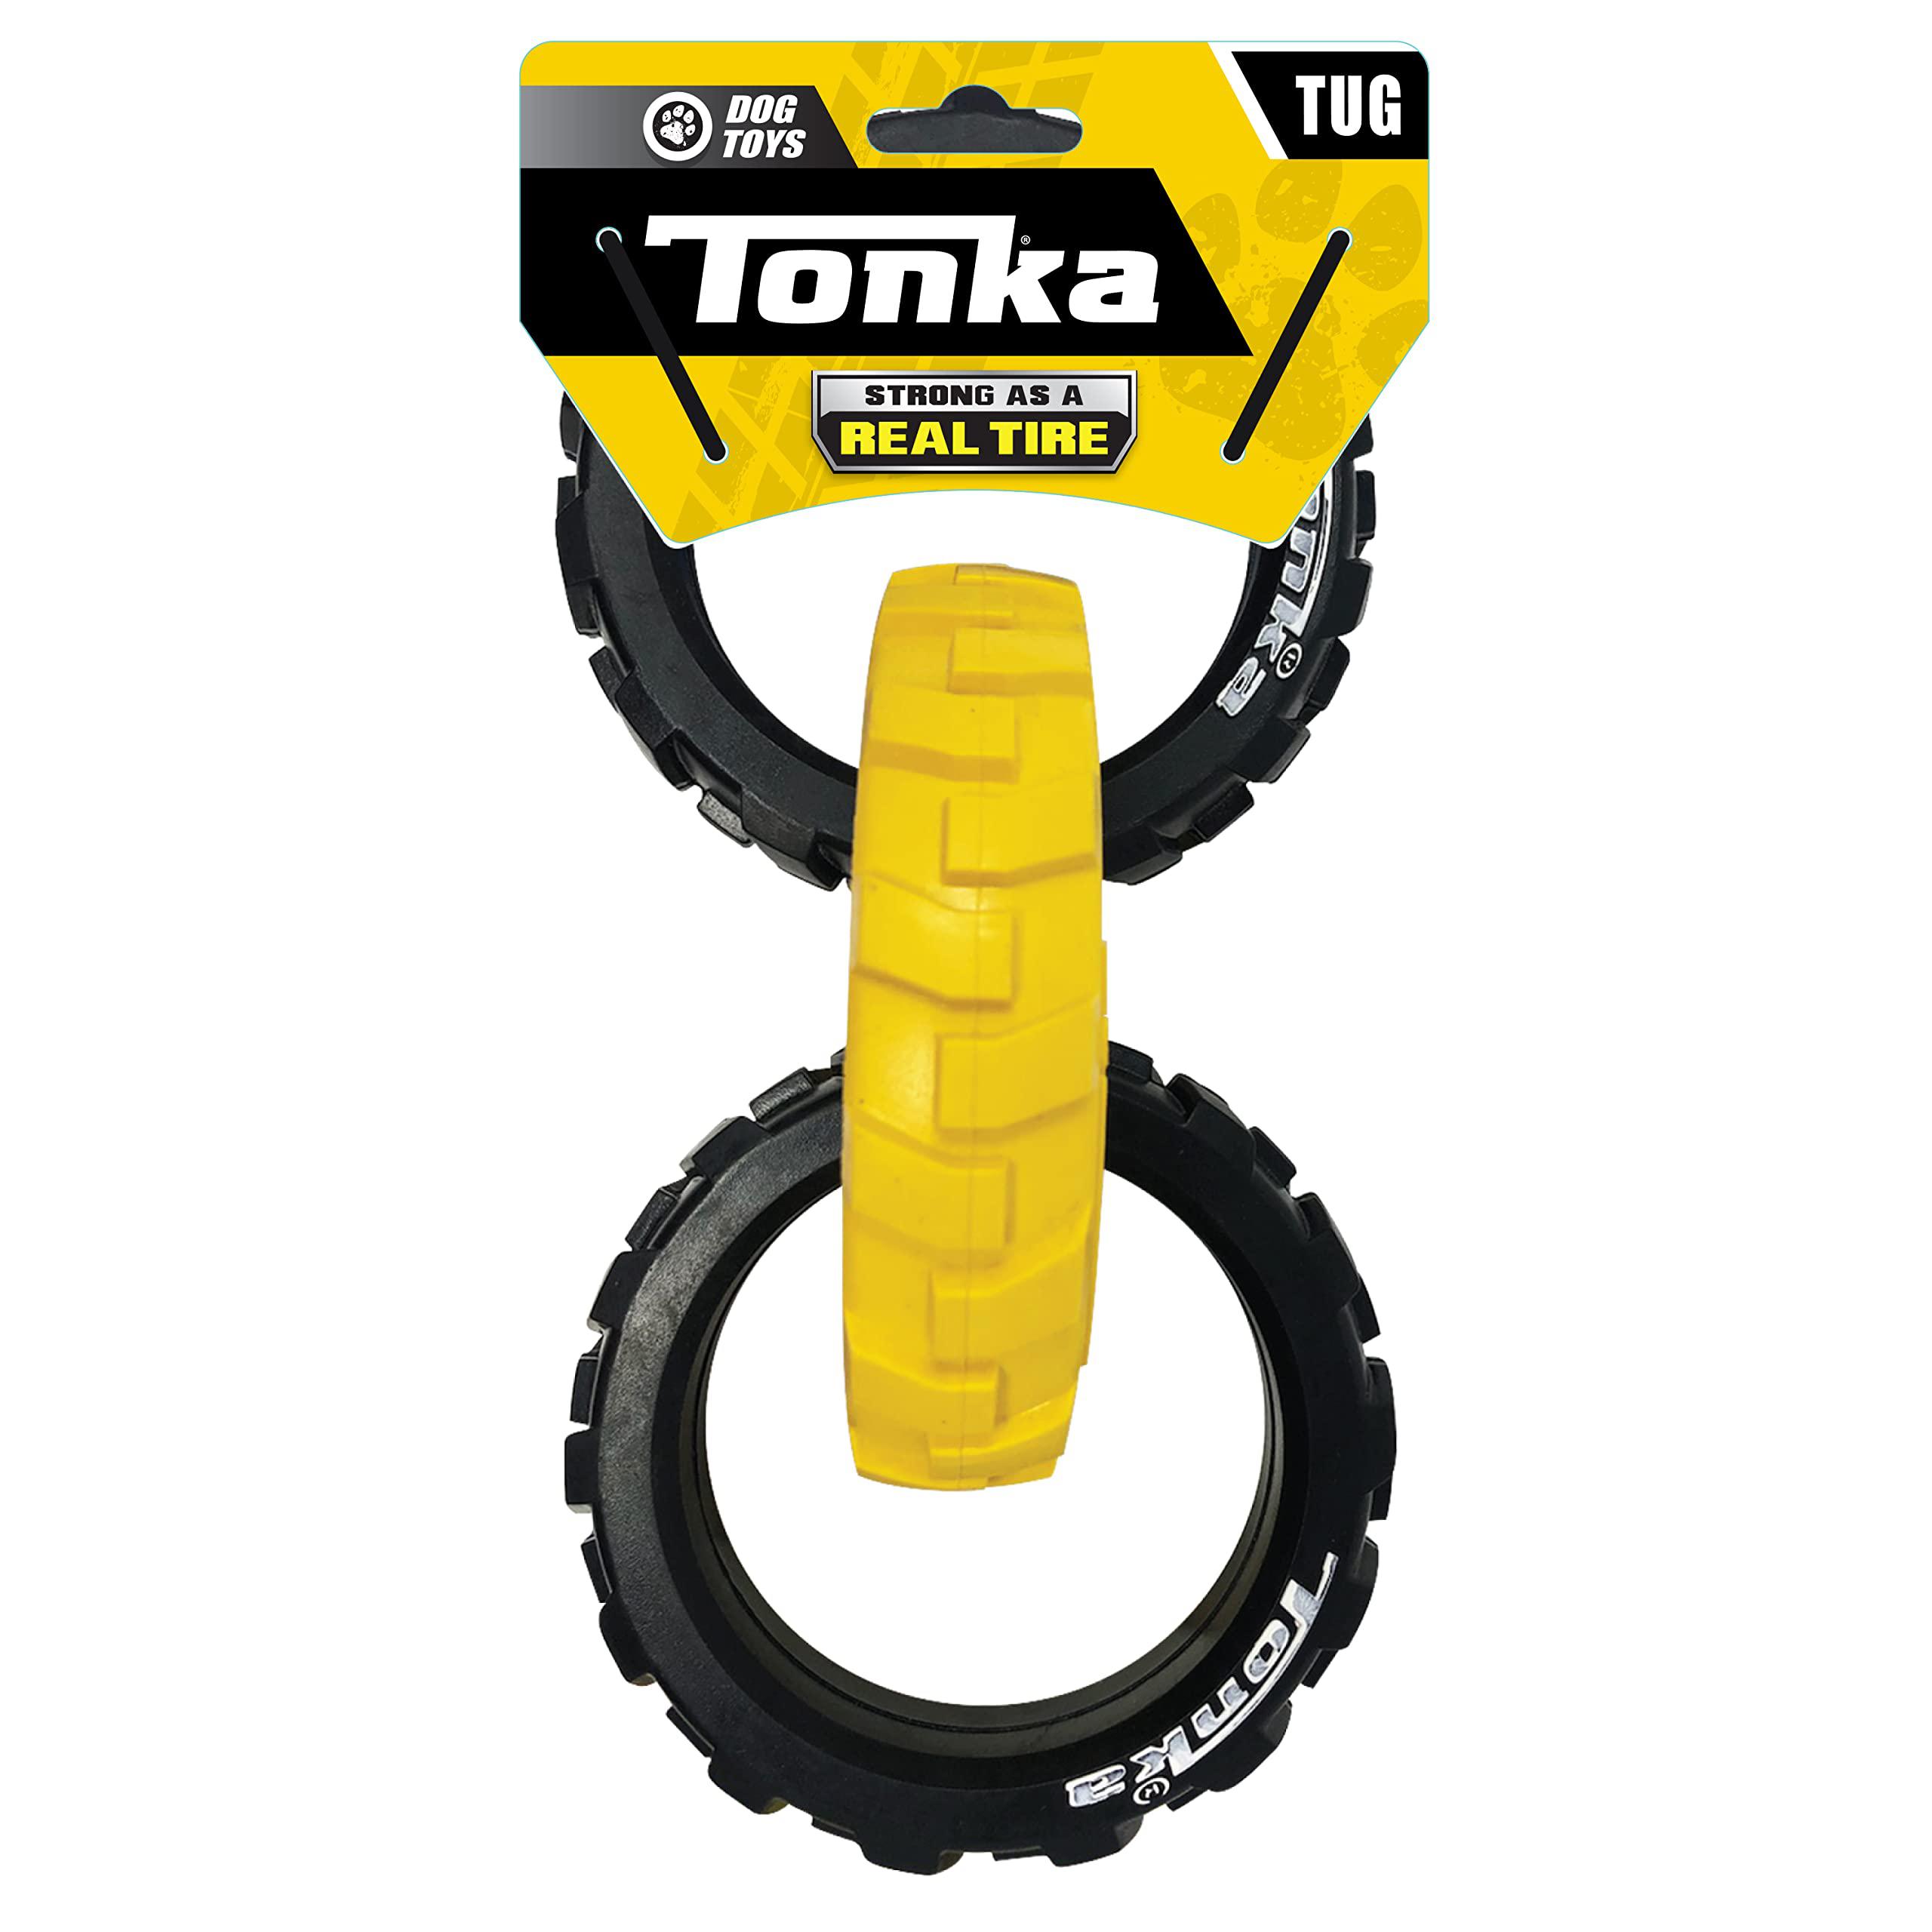 tonka rubber 3-ring tug dog toy, lightweight, durable and water resistant, 10.5 inches, for medium/large breeds, single unit,